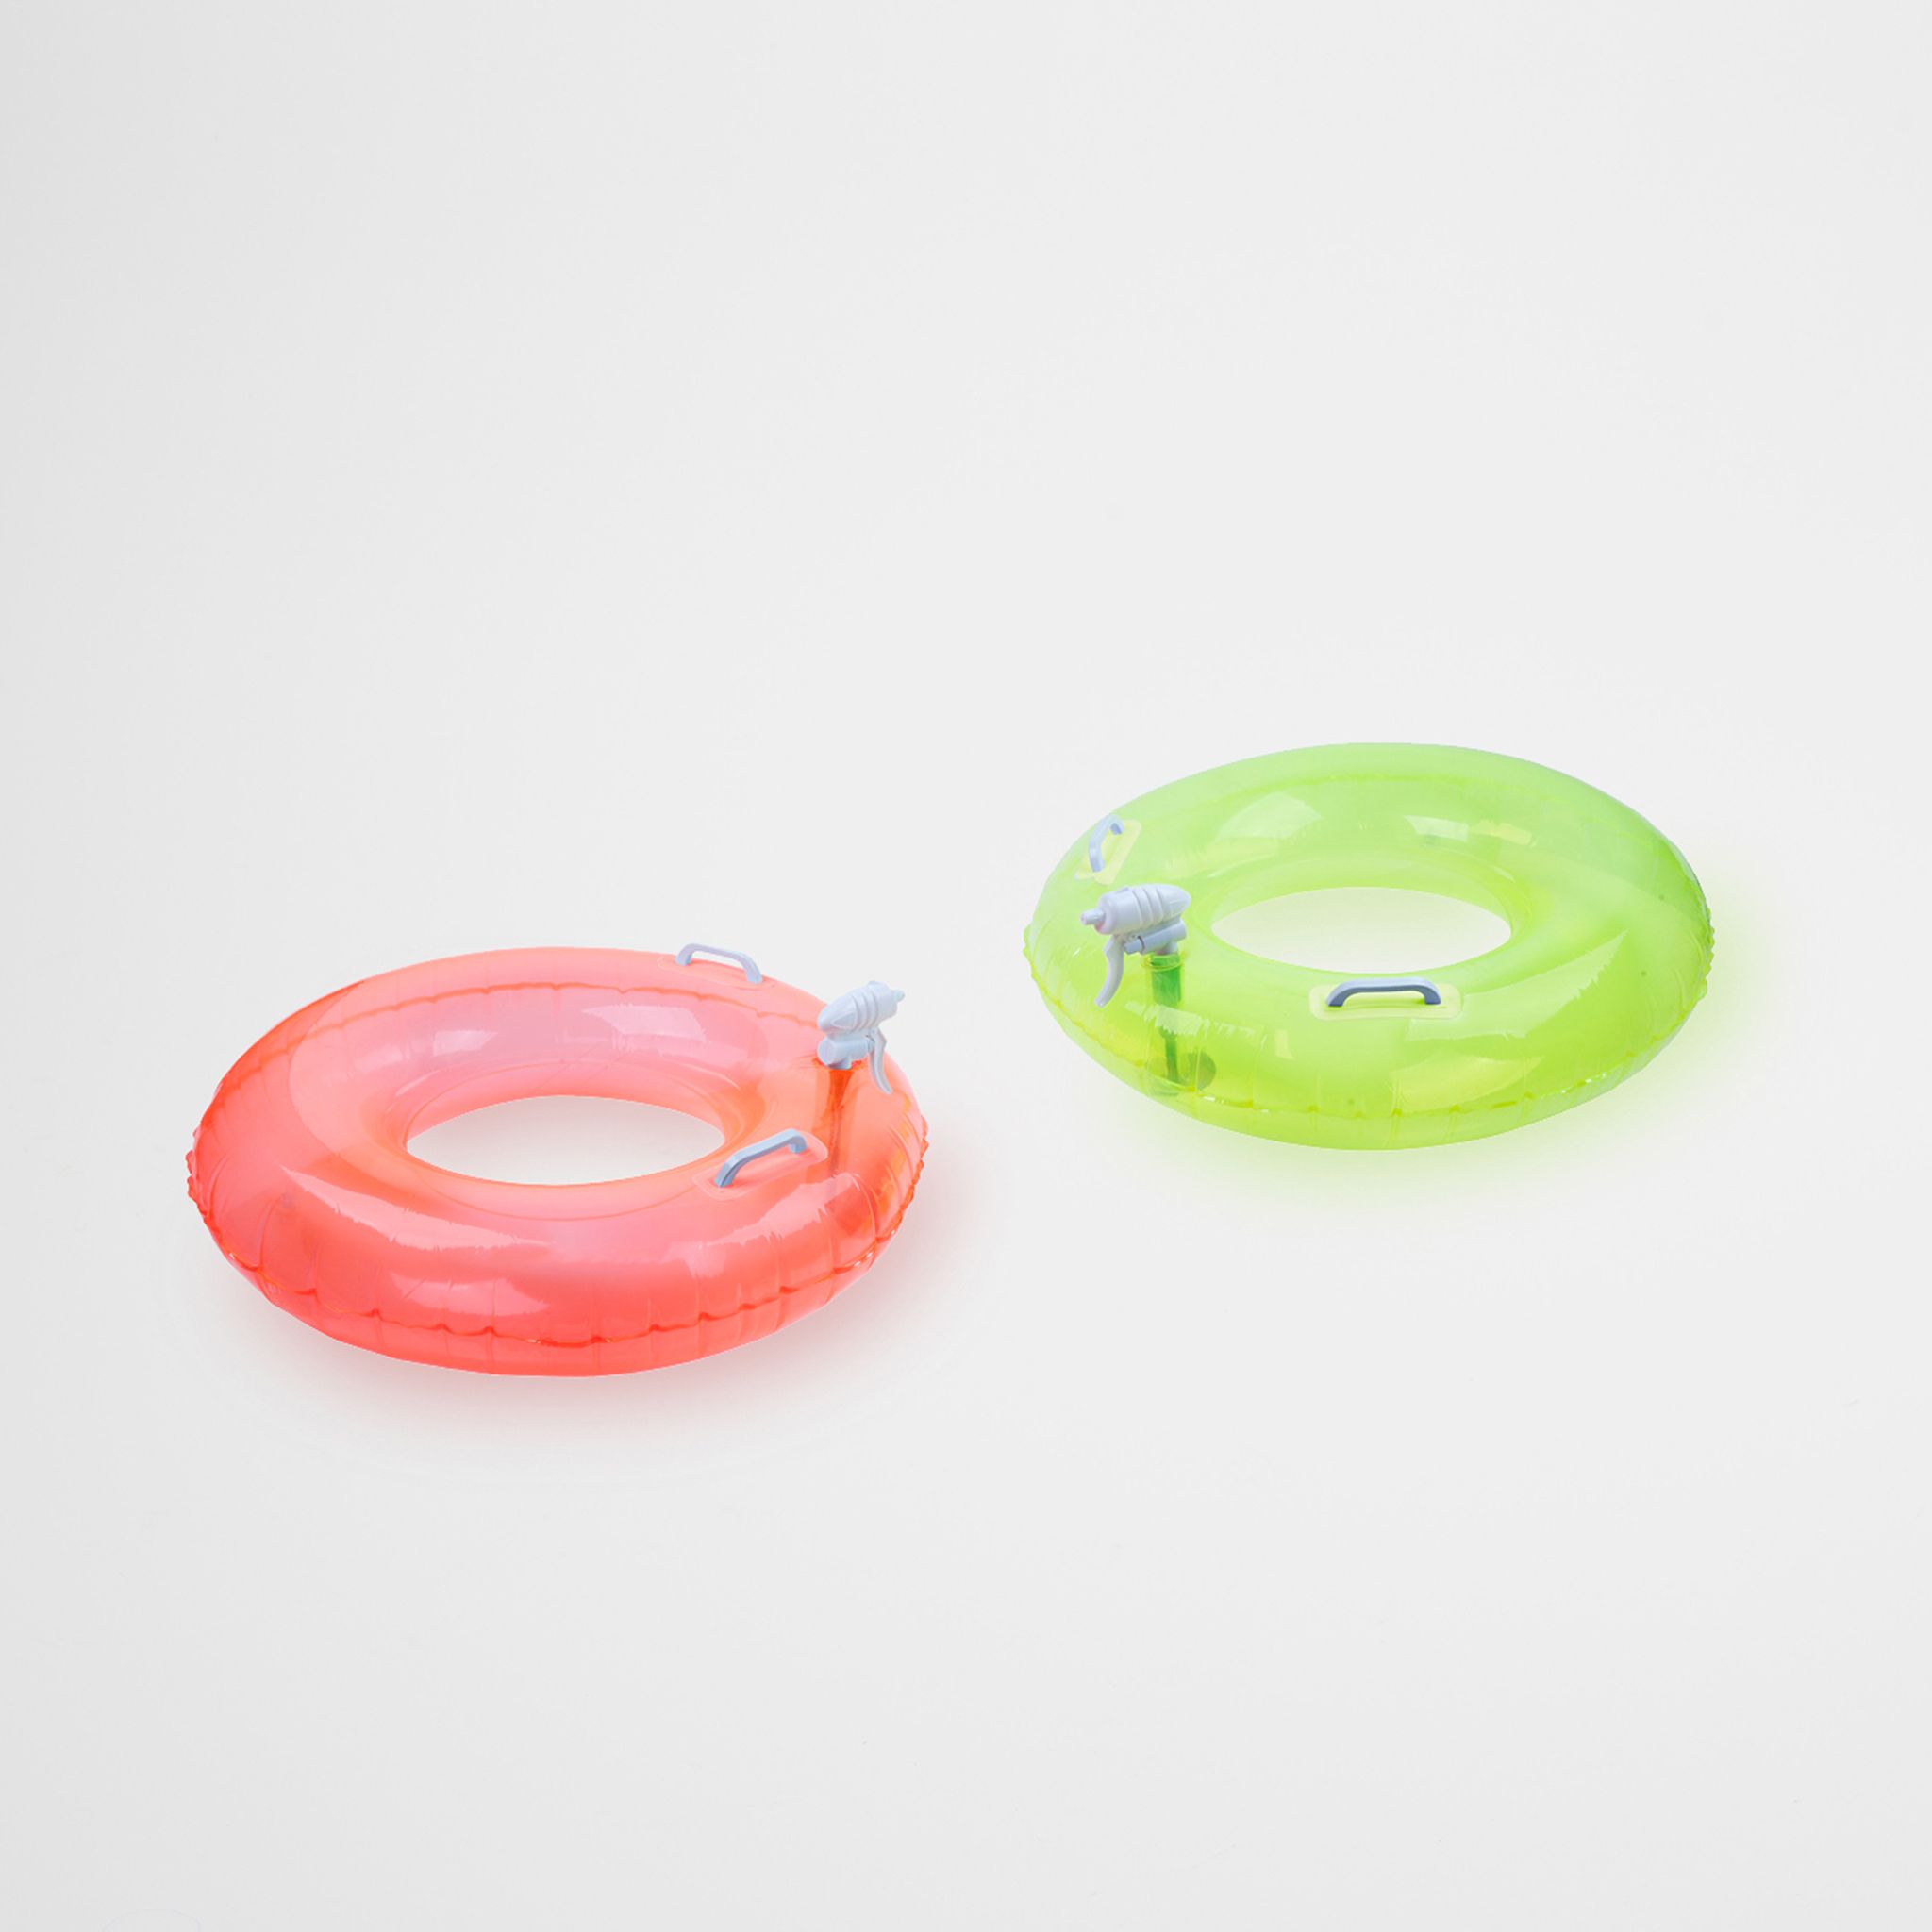 Pool Ring Soakers Citrus-Neon Coral Set Of 2